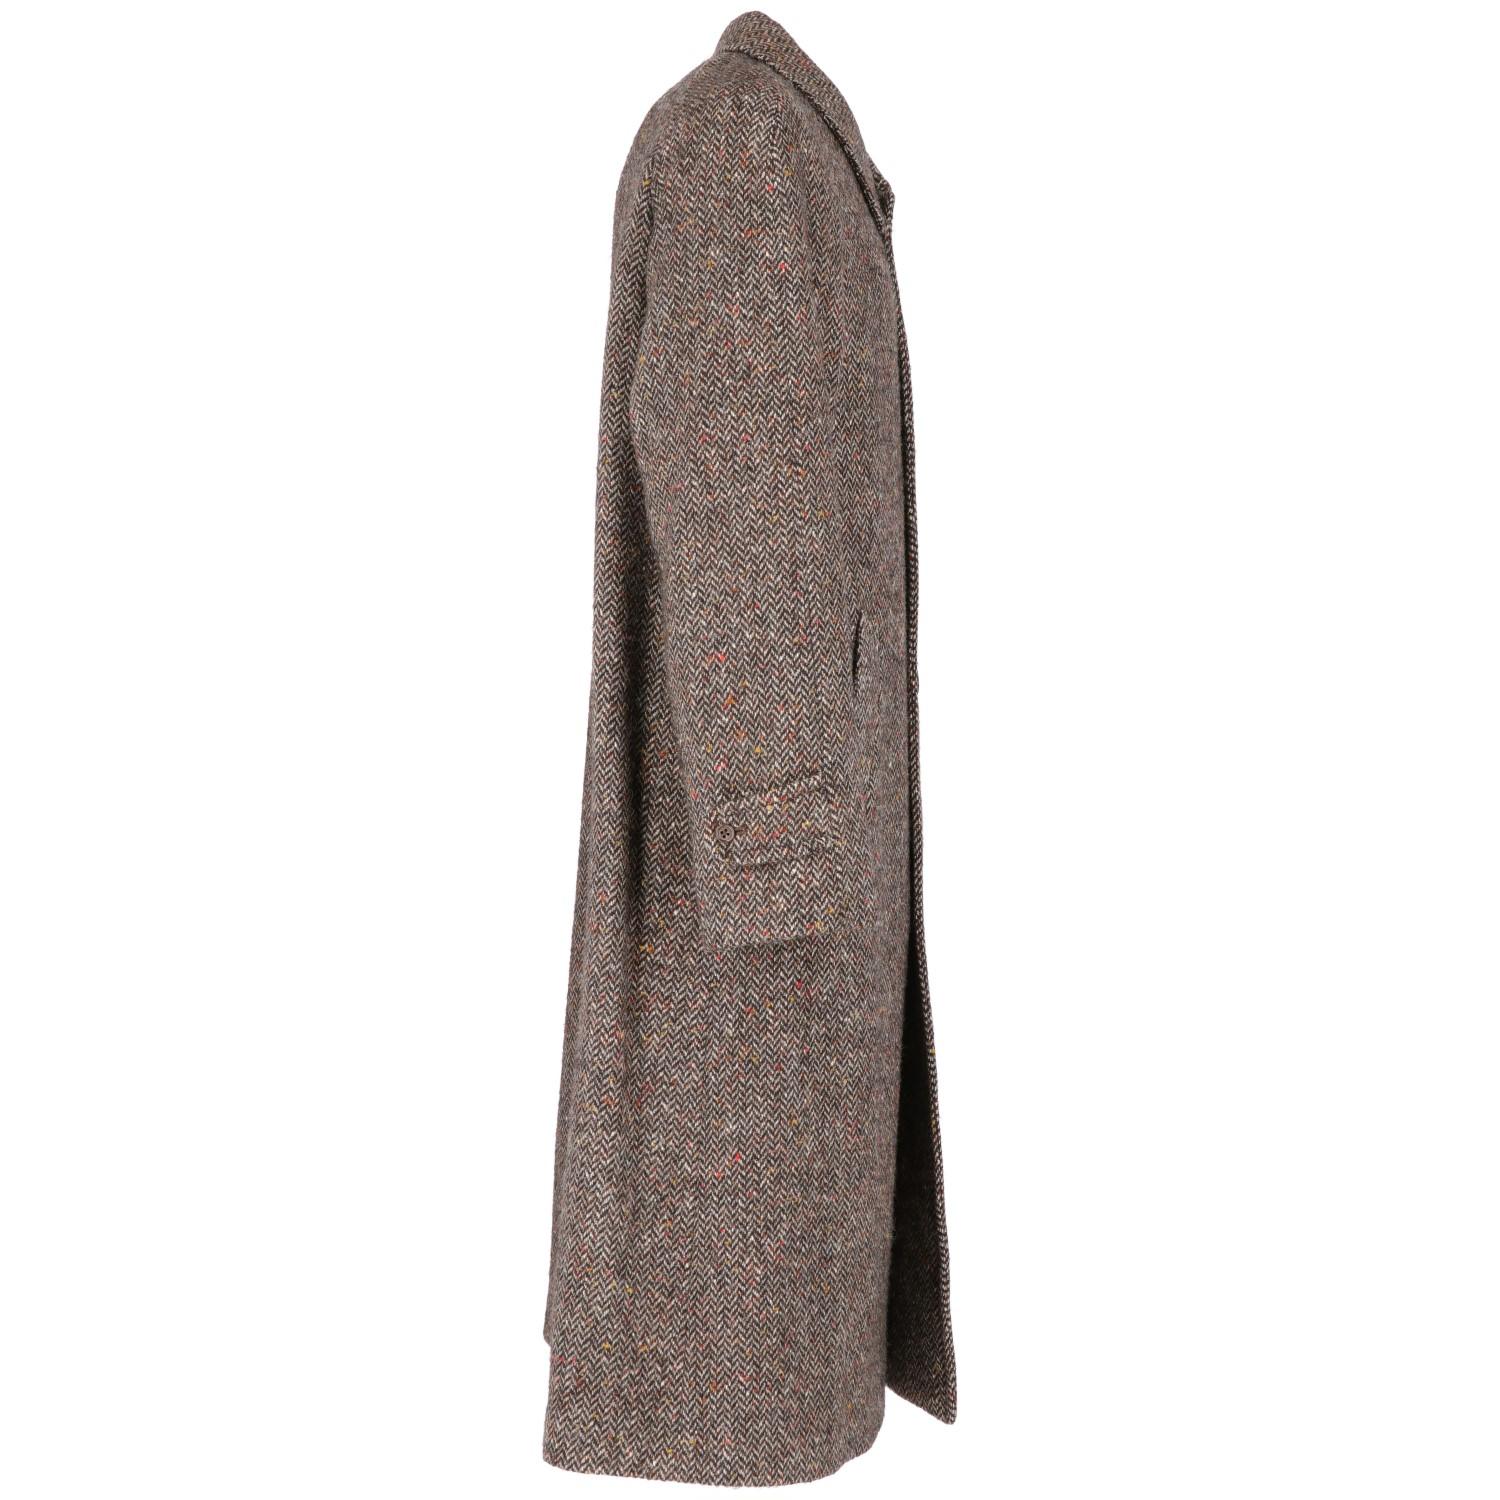 Aquascutum herringbone wool coat for men in brown and white colors, with red and yellow buttoned effect. Featuring a classic collar, raglan sleeves, two oblique pockets and a deep rip on the lower back.  The item is vintage, it was produced in the